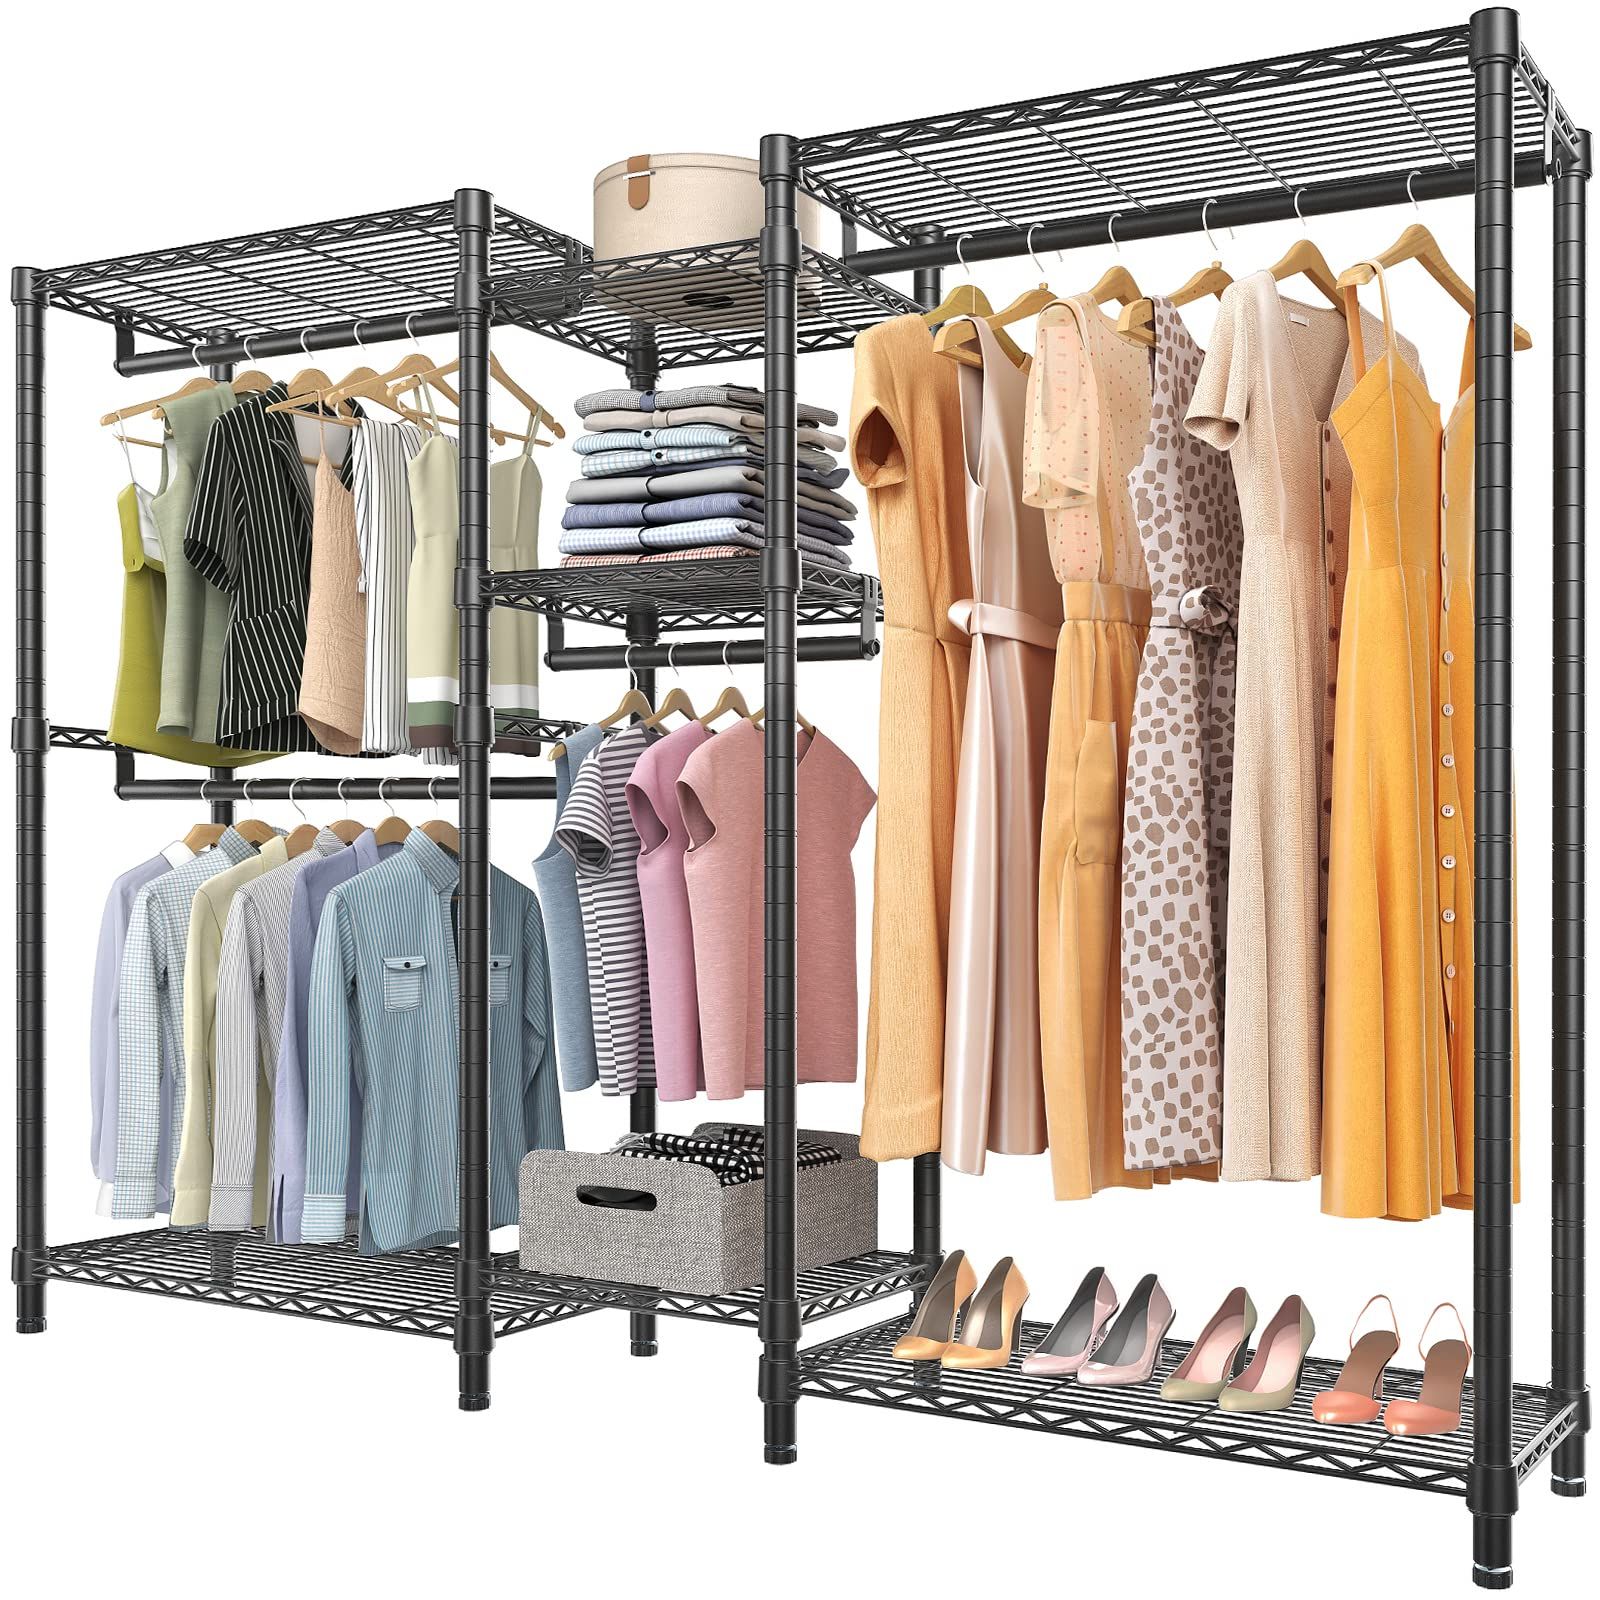 Most Current Wire Garment Rack Wardrobes Intended For Amazon: Vipek V6 Wire Garment Rack Heavy Duty Clothes Rack Metal With  Shelves, Freestanding Portable Wardrobe Closet Rack For Hanging Clothes  74.4" L X 17.7" W X 76.8" H, Max Load 780lbs, (Photo 2 of 10)